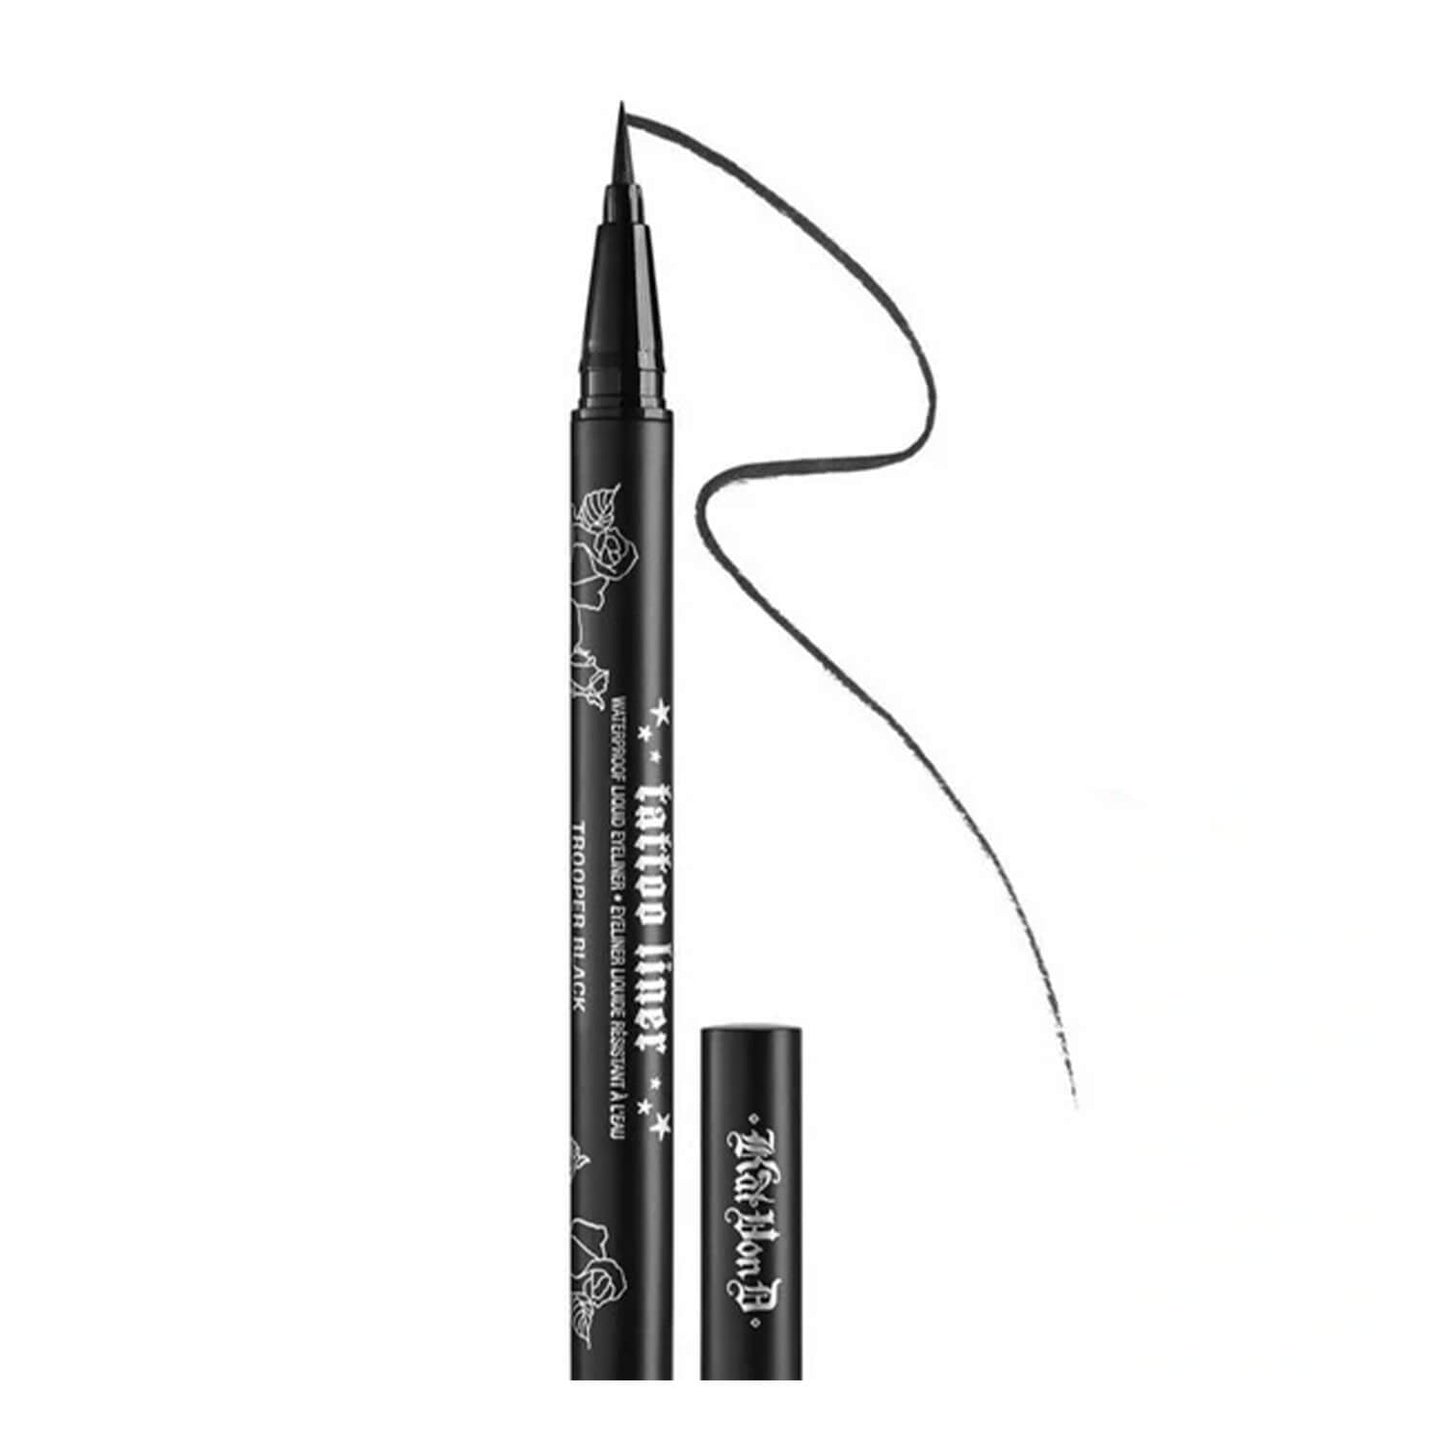 Shop Kat Von D Tattoo Liner available at Heygirl.pk for delivery in Karachi, Lahore, Islamabad across Pakistan.